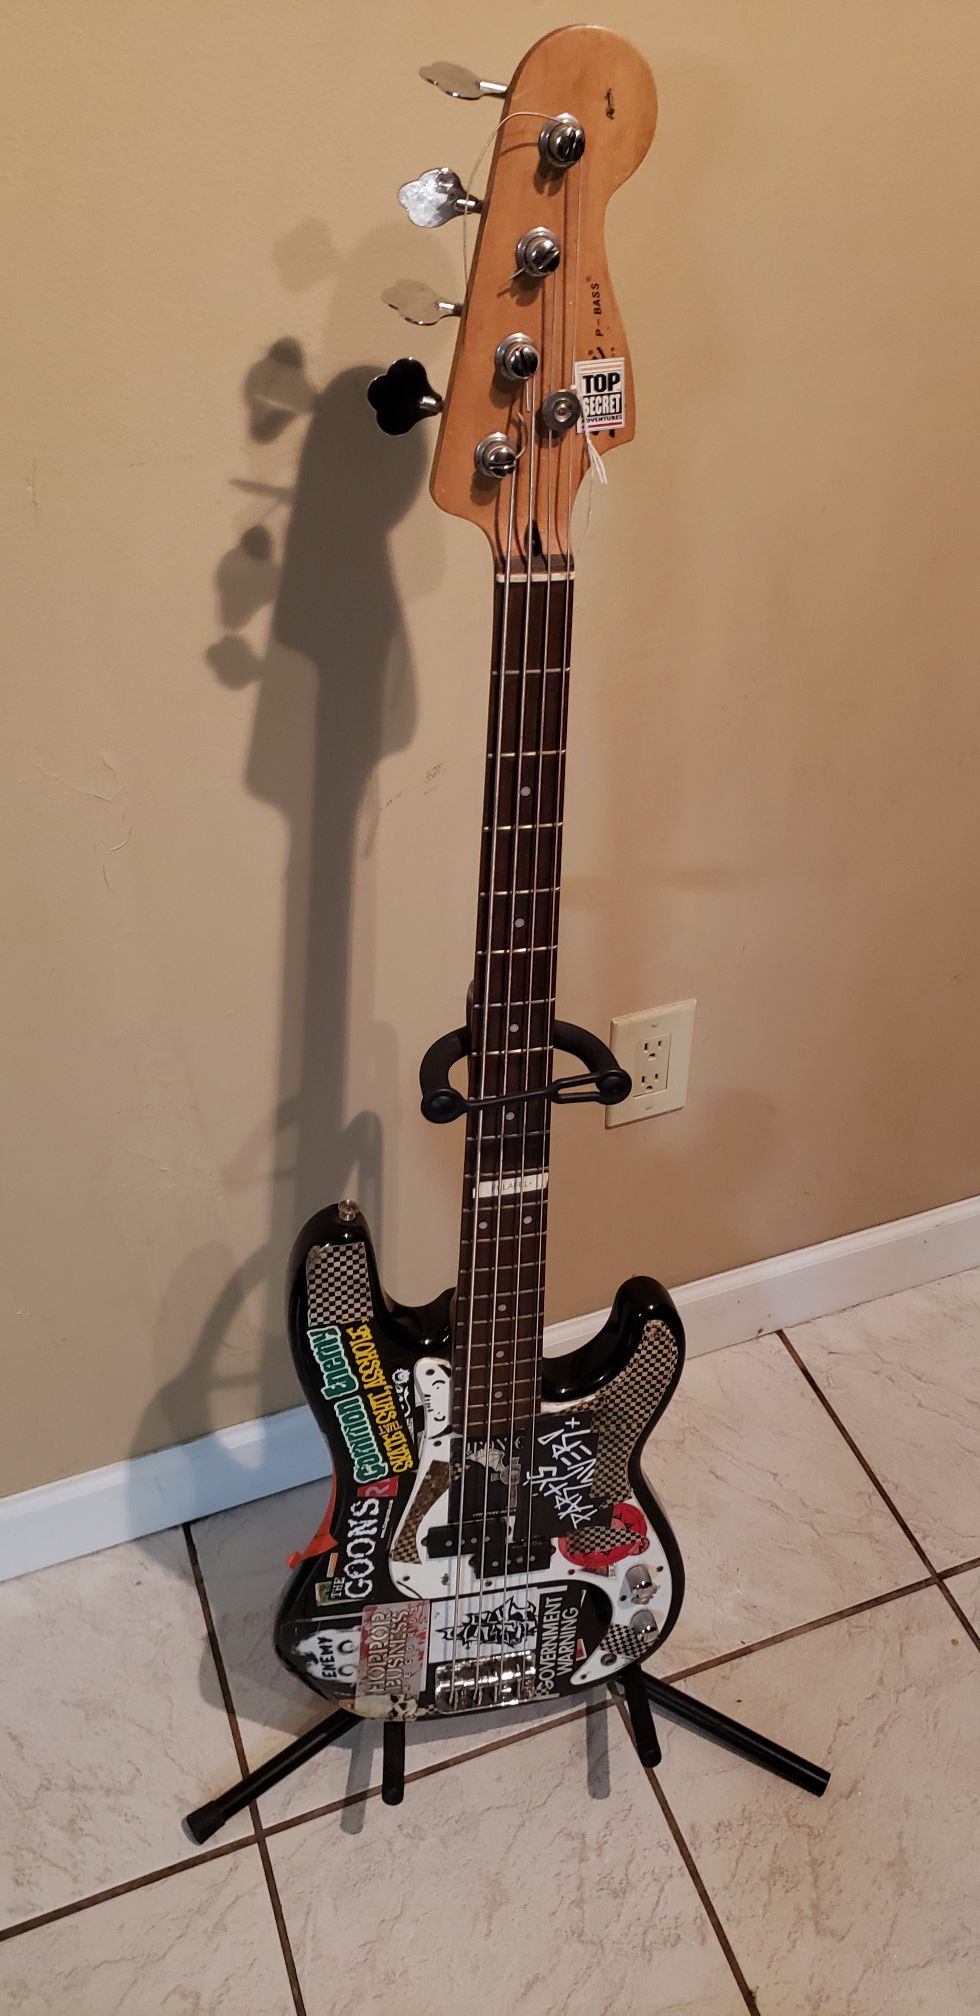 Squire bass guitar signed by rise against band